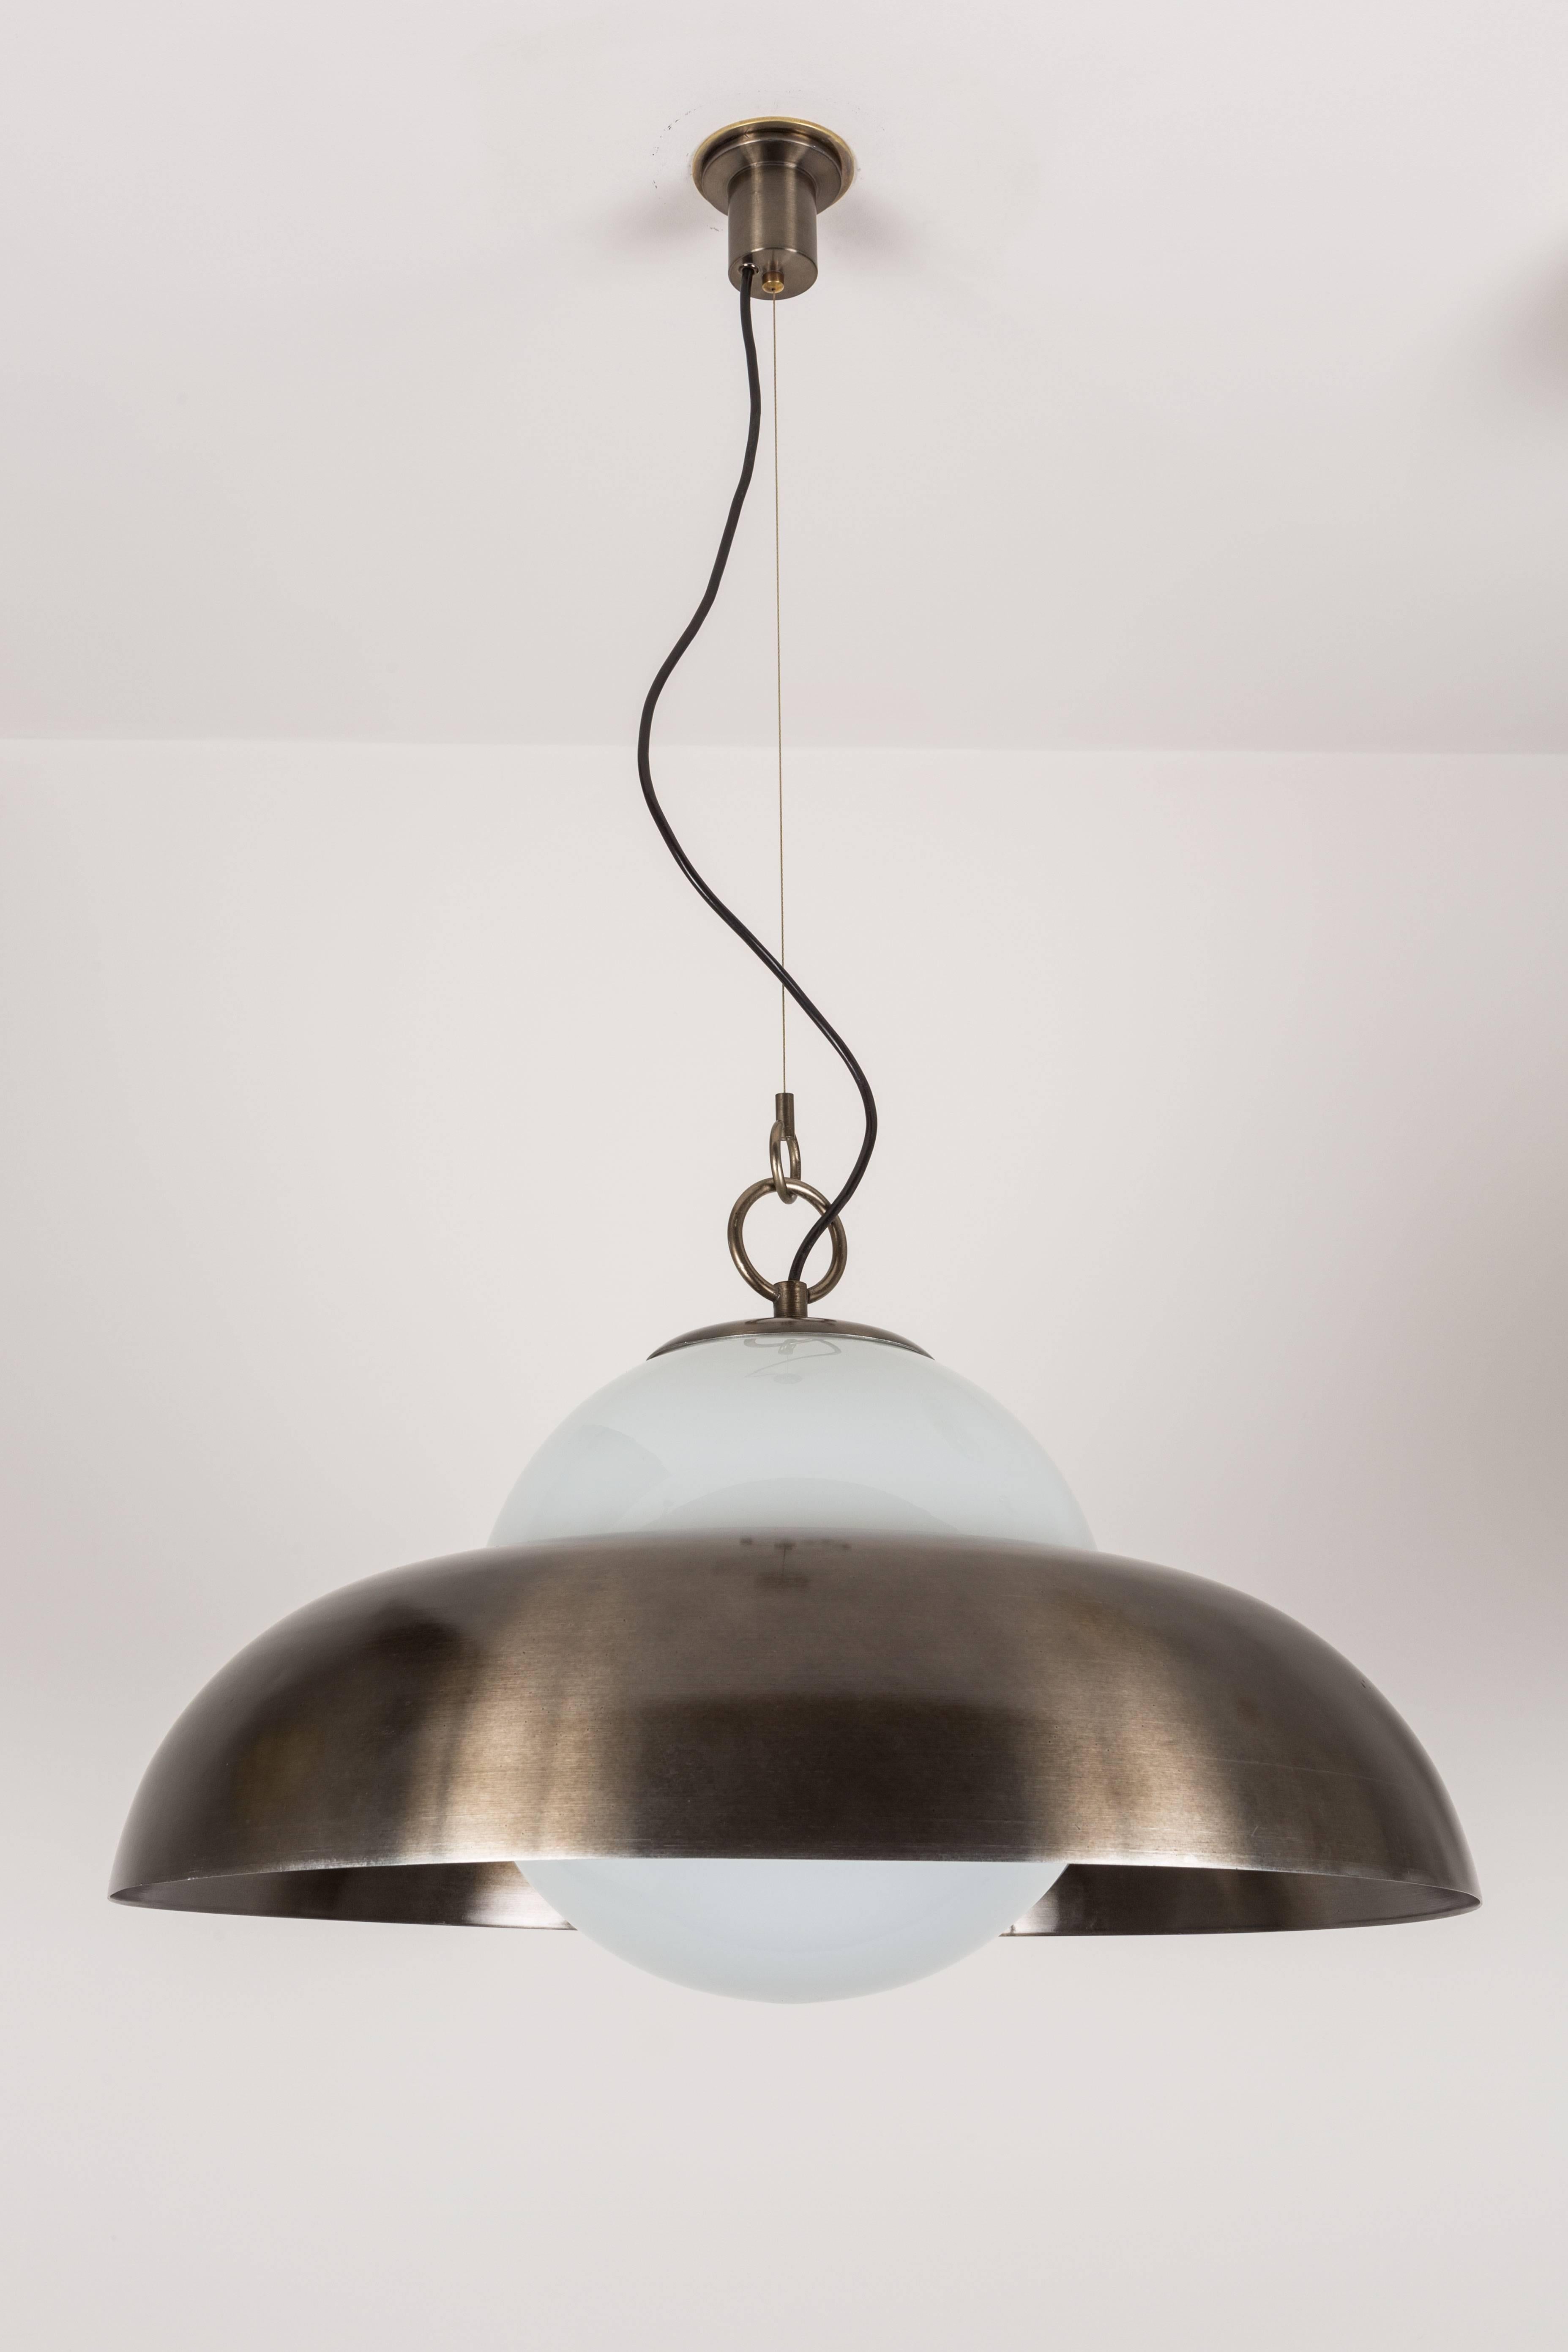 Italian Model A288 Suspension Lamp by Sergio Asti for Candle